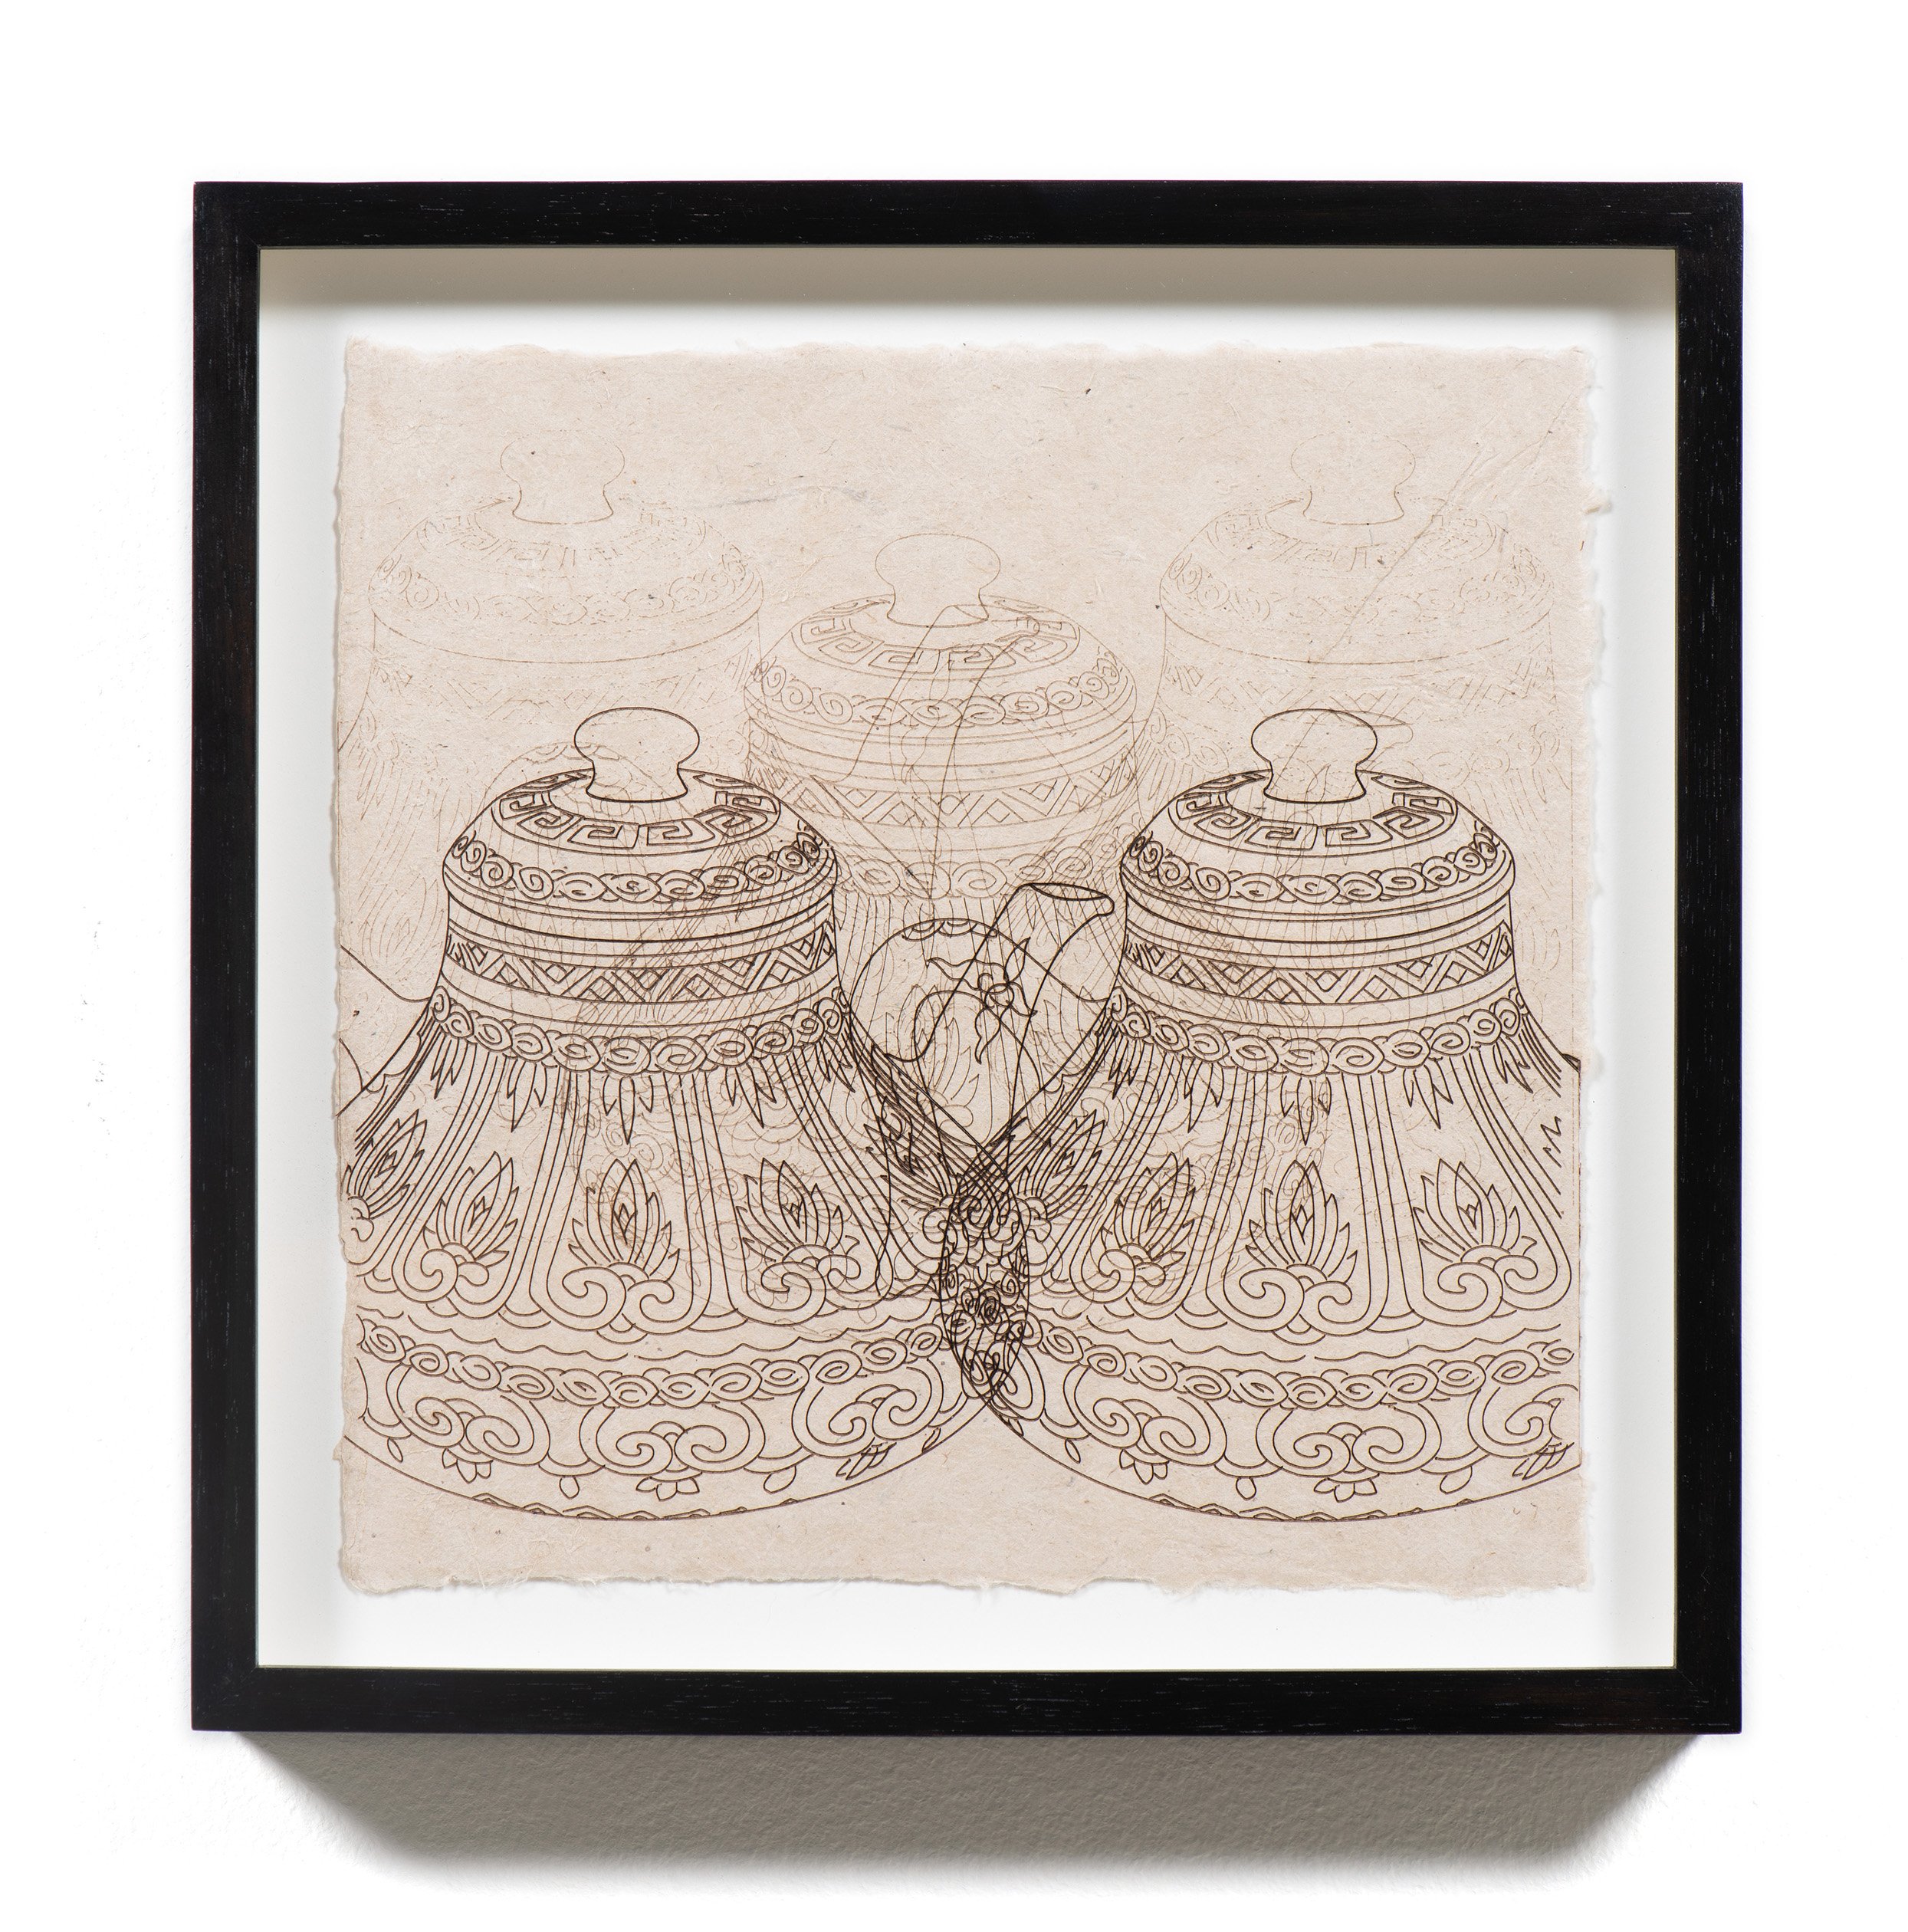   Teapots  , 2021 Paper  8 3/4 x 8 3/4 x 1 1/2 inches (framed) 